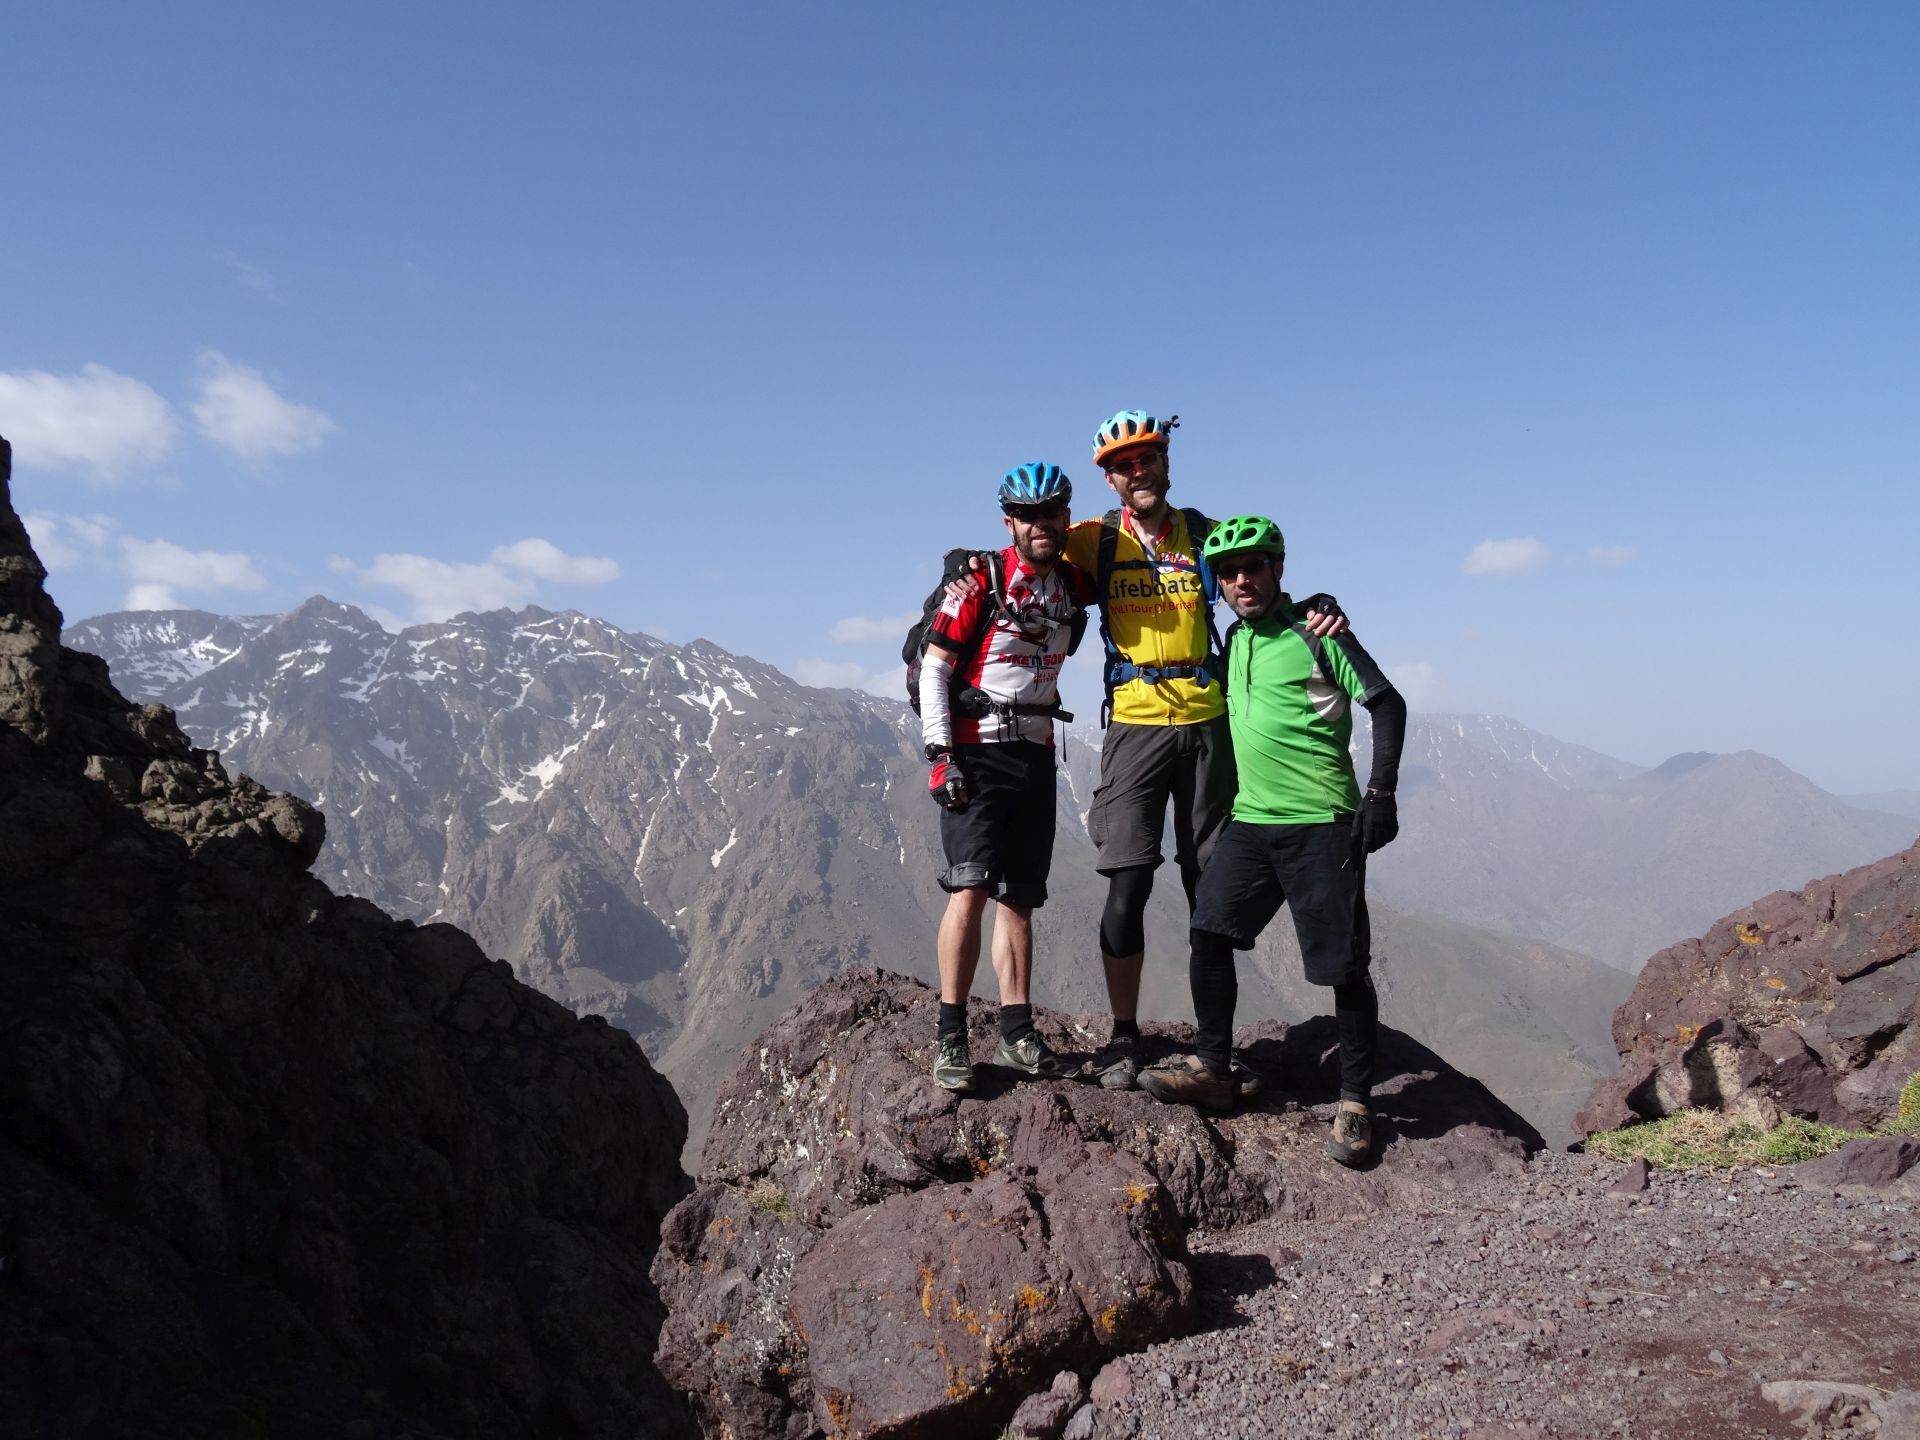 Day 8 - Made it! Thanks lads! A suitable rock near the high point of our trip, the Tizi-n-Eddi pass (9,606 ft). Jbel Aksoual (12,828 ft) is the highest peak on the left. © Steve Woodward